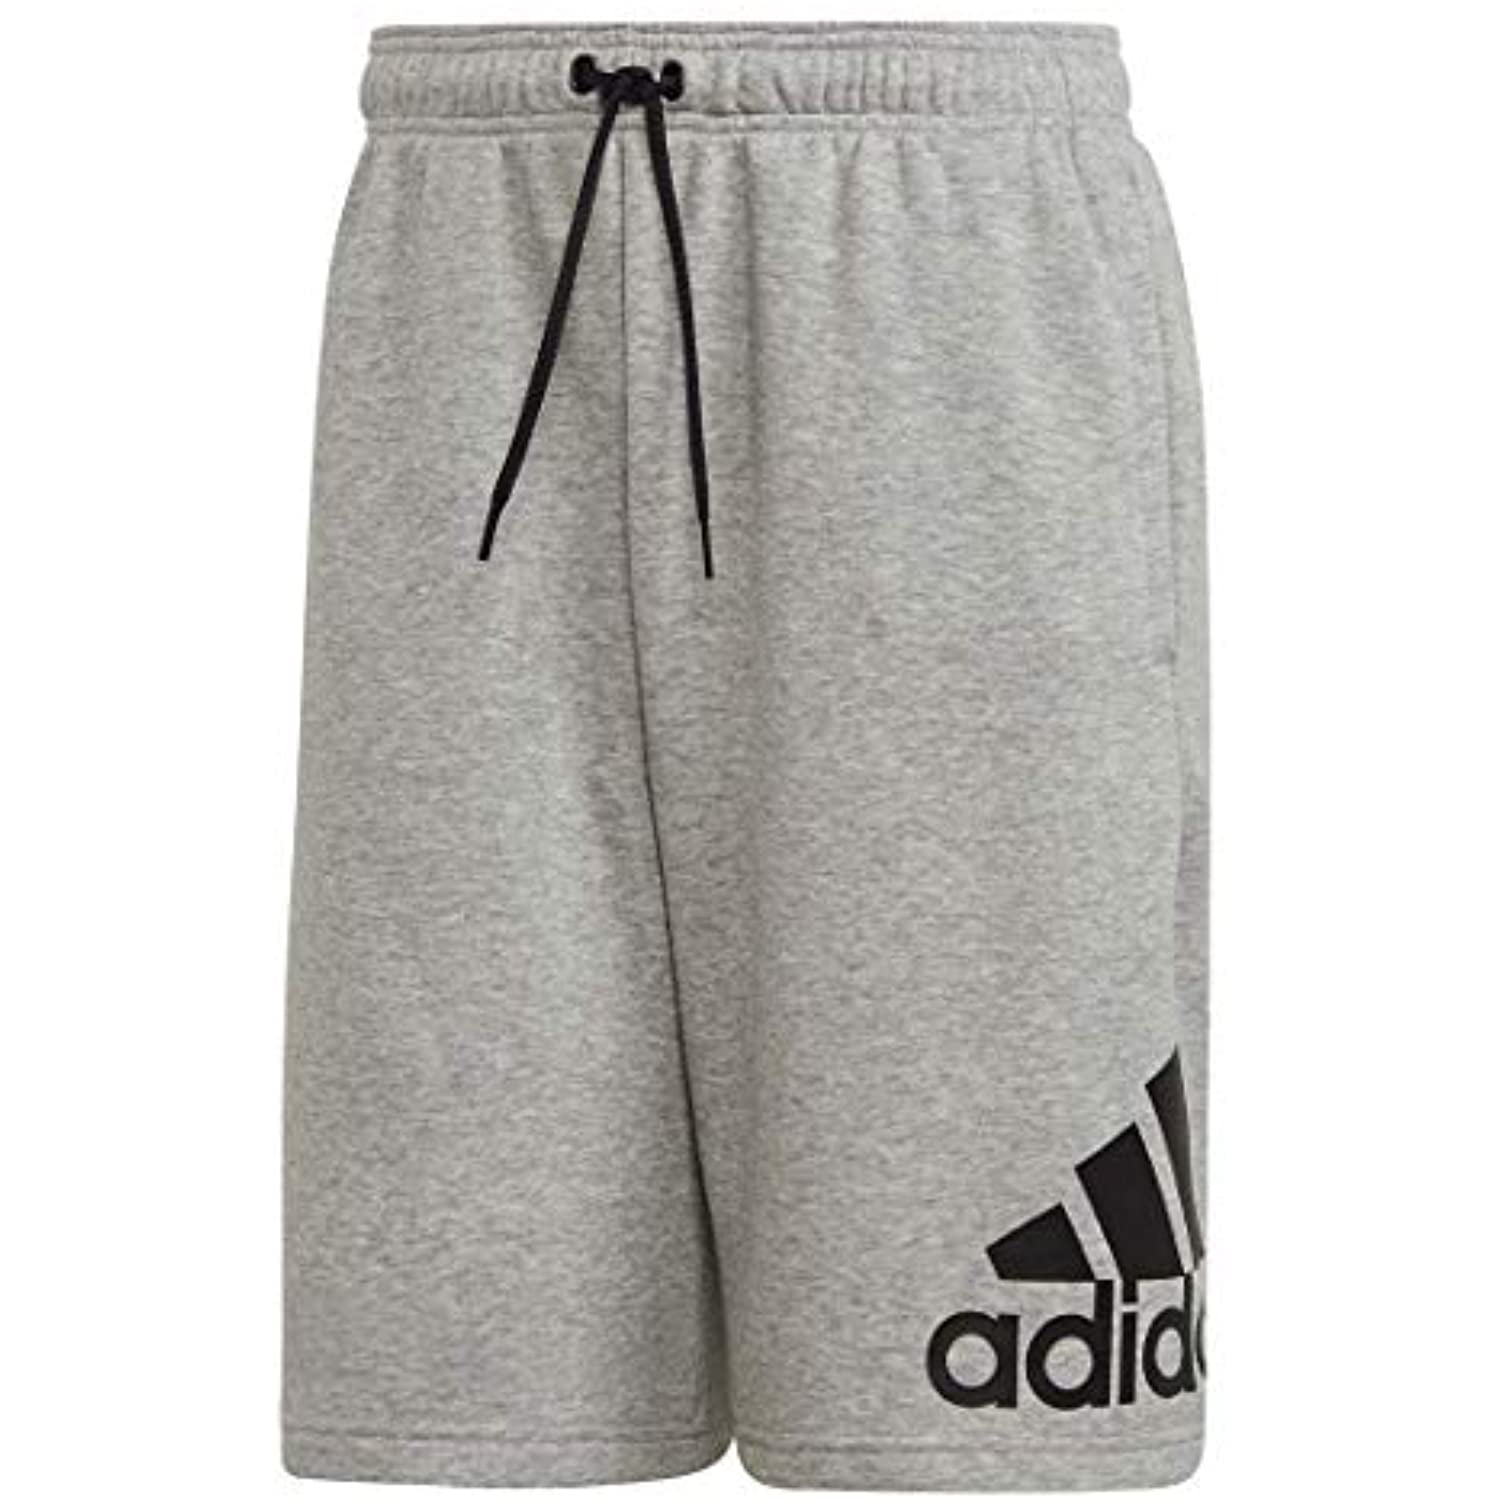 adidas Men's Must Haves Badge of Sport French Terry Shorts, Medium Grey  Heather, X-Small